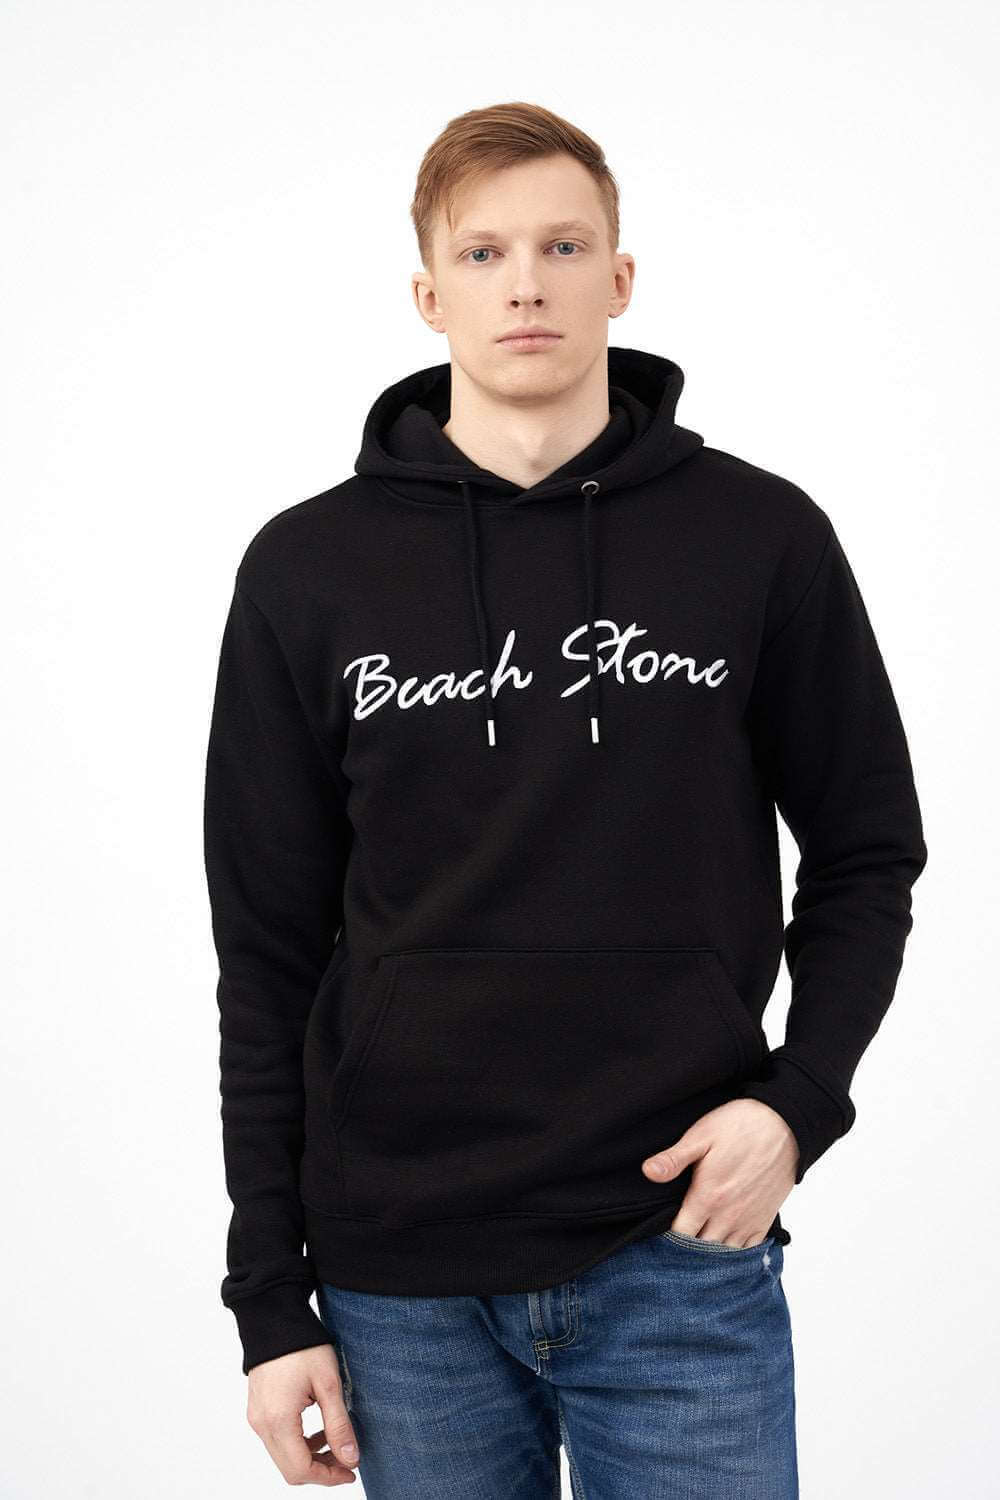 Front Pose of Men's Hoodie with Beach Stone Embroidery